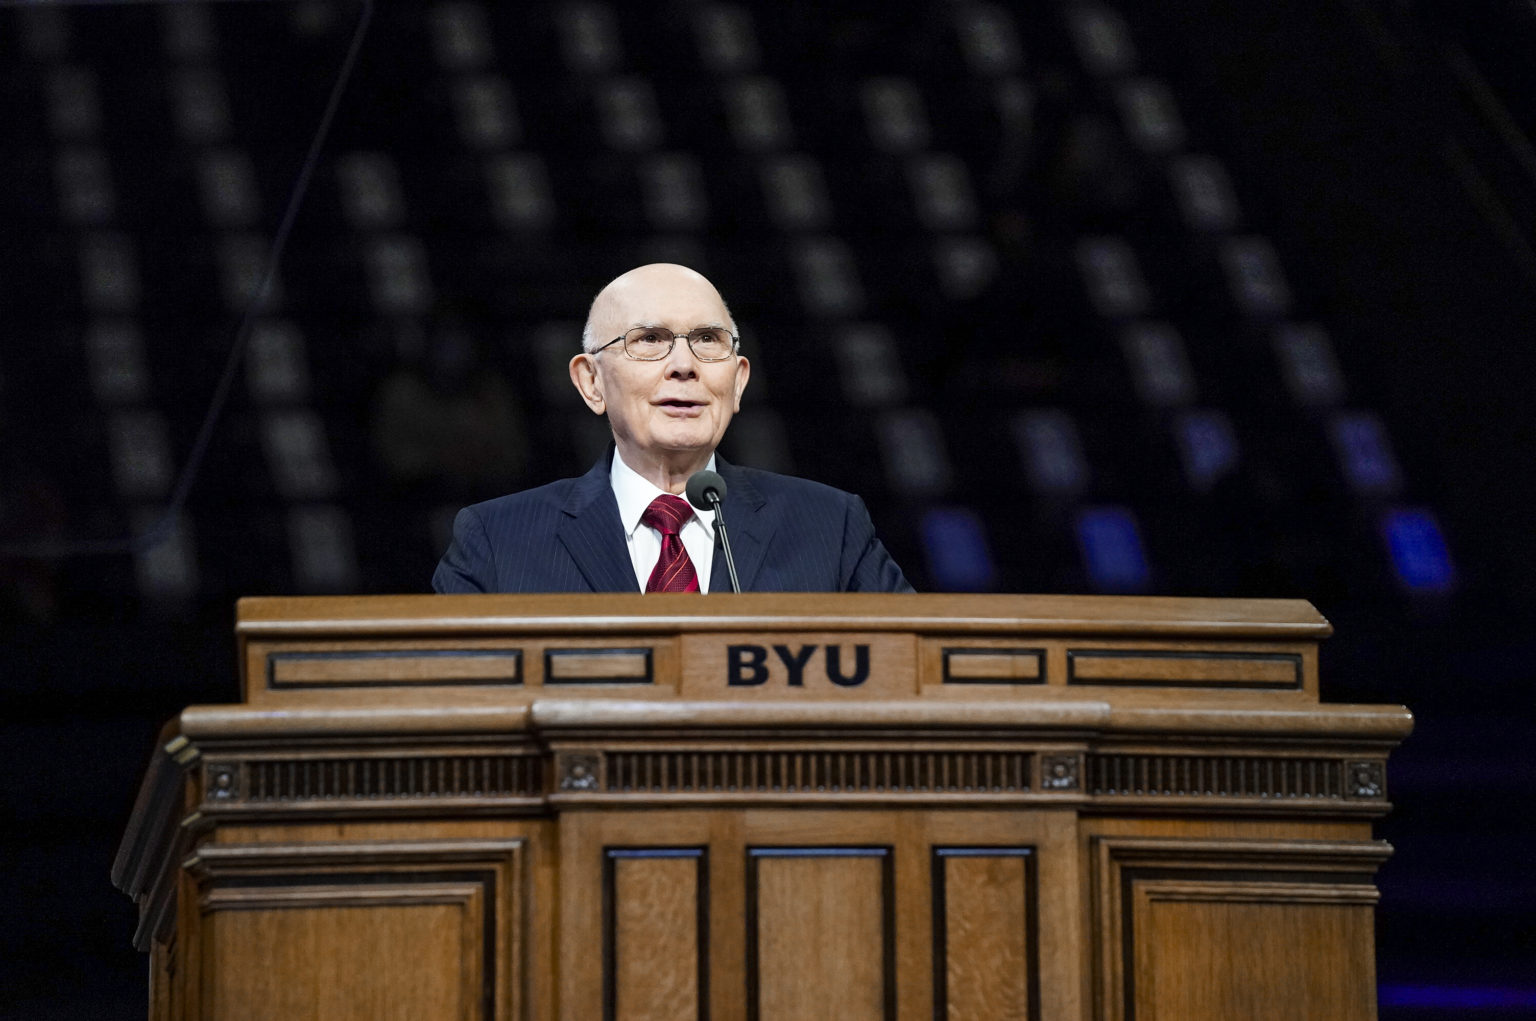 President Dallin H. Oaks says Black lives matter, urges all to rely on